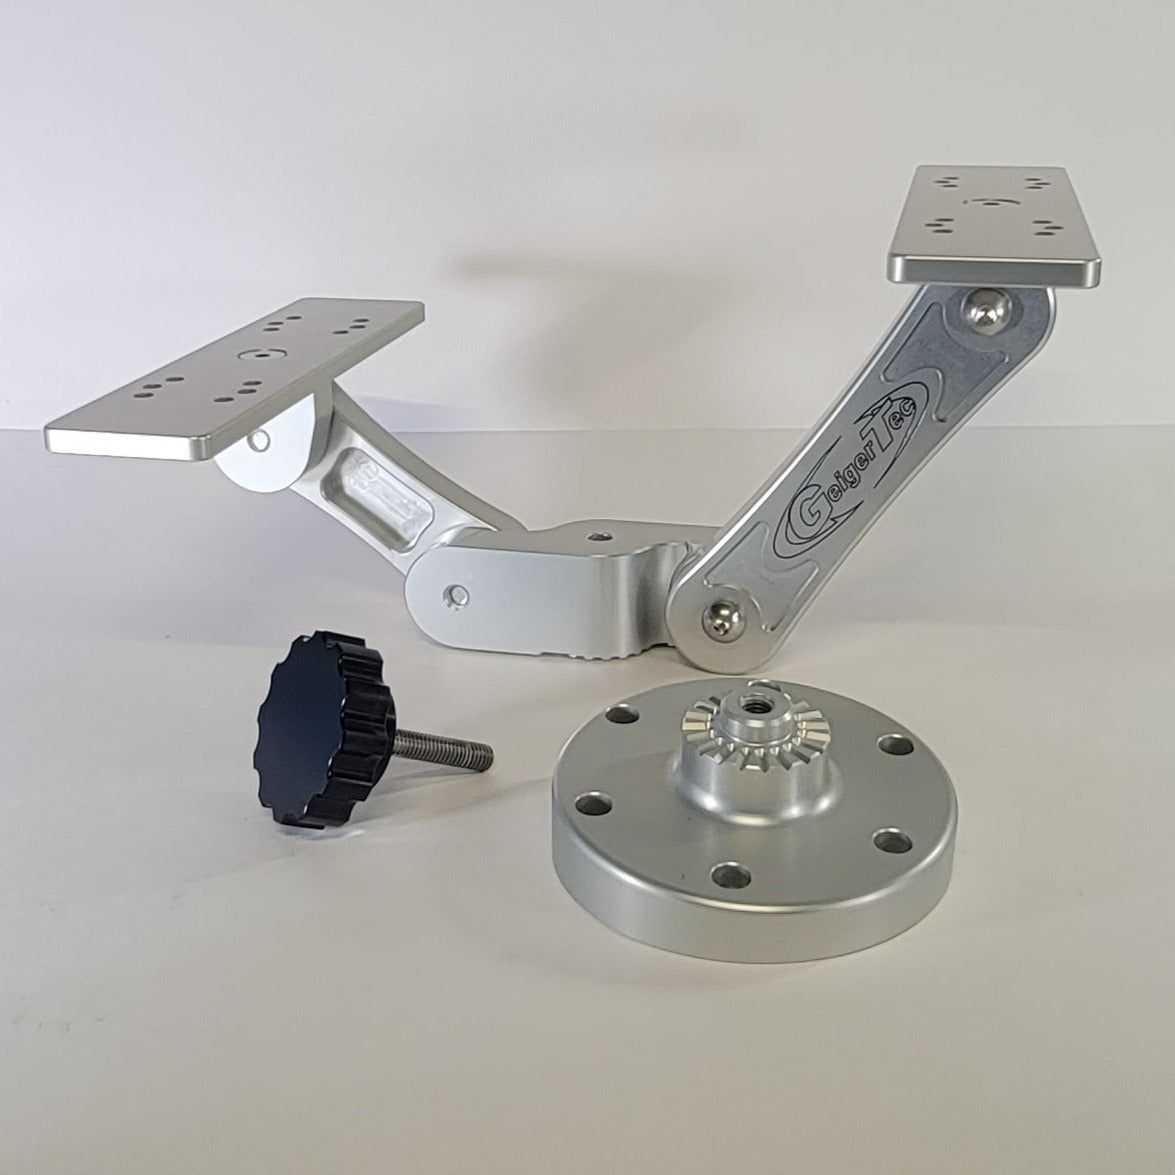 Fishing electronic graph mounts and fish finder mounts for your